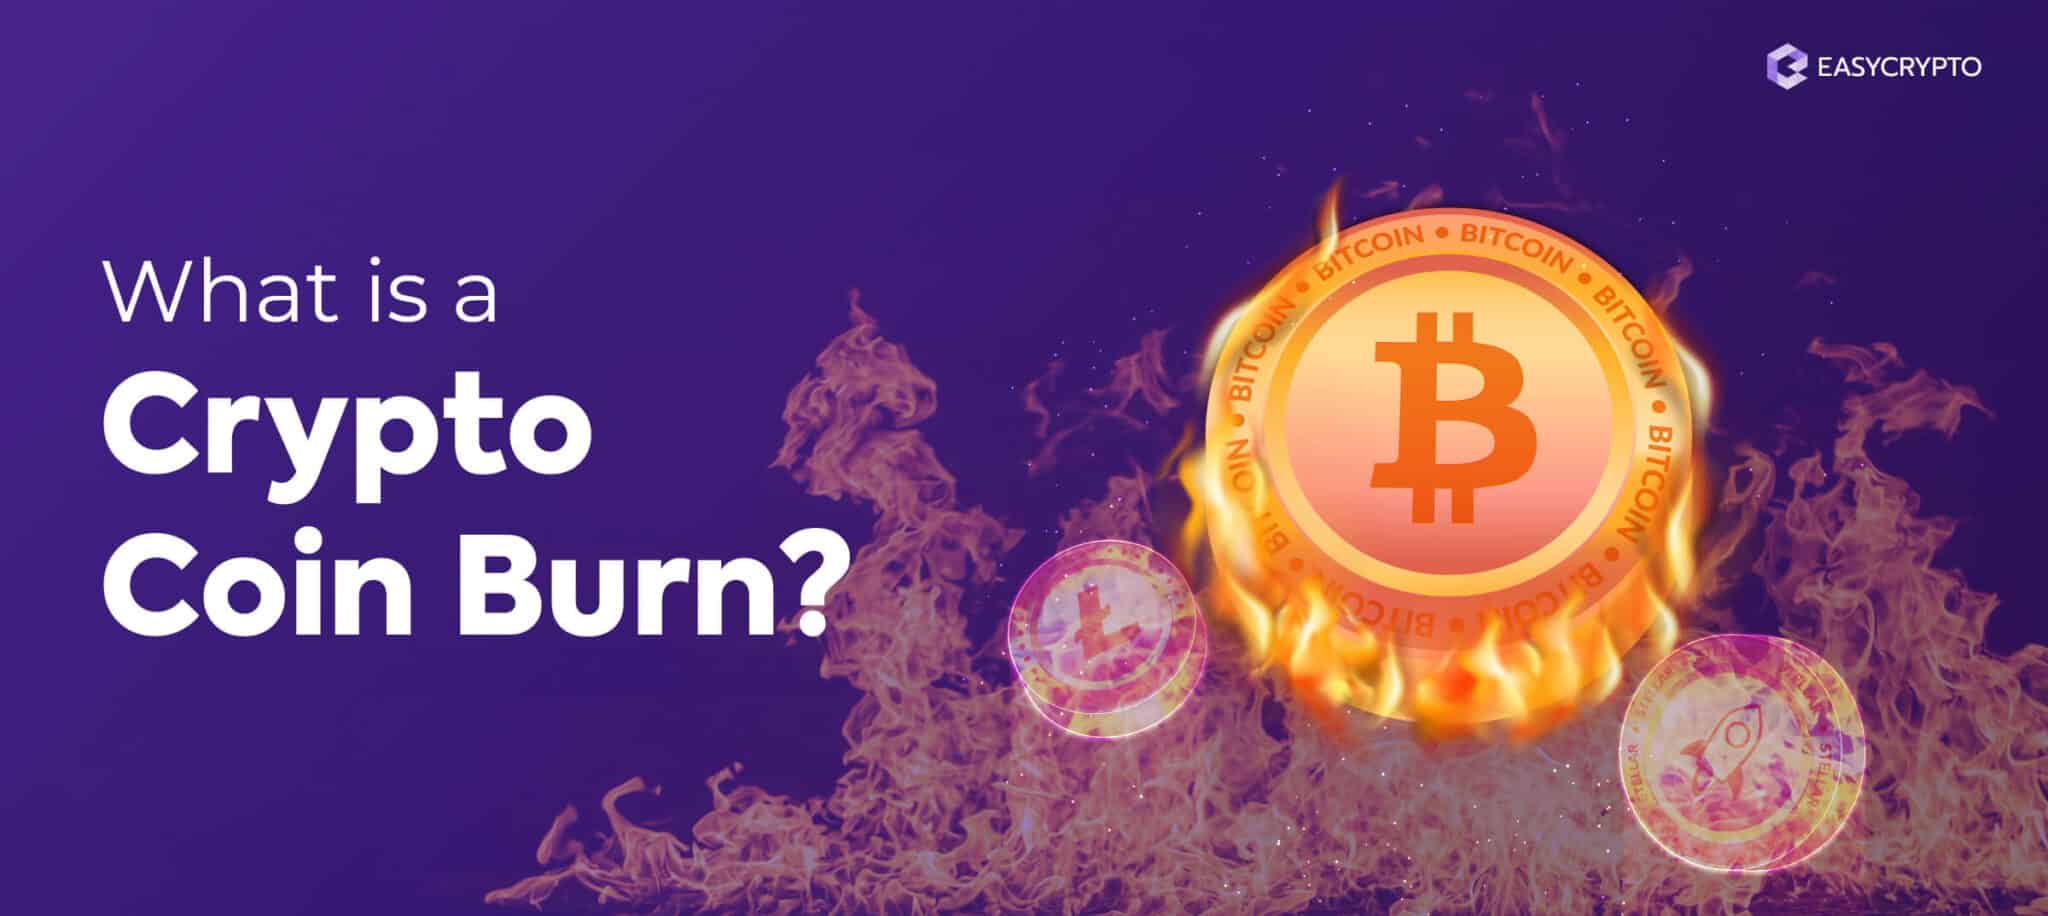 what happens when crypto coins are burned